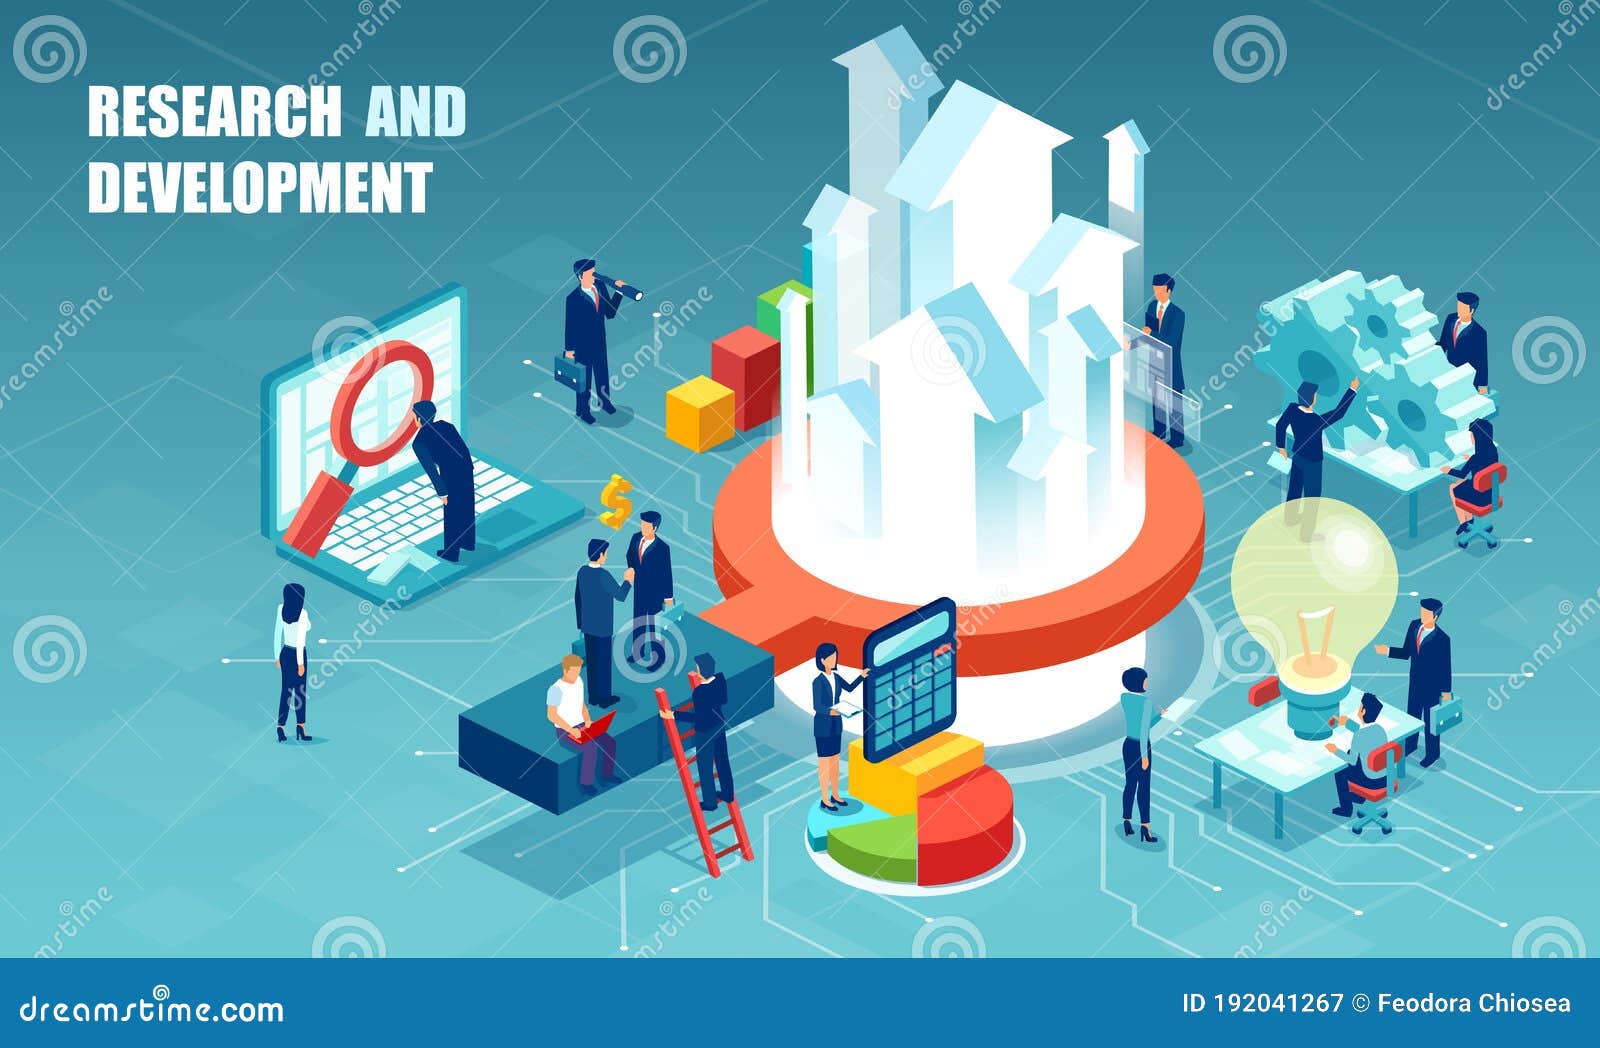 research and development business function